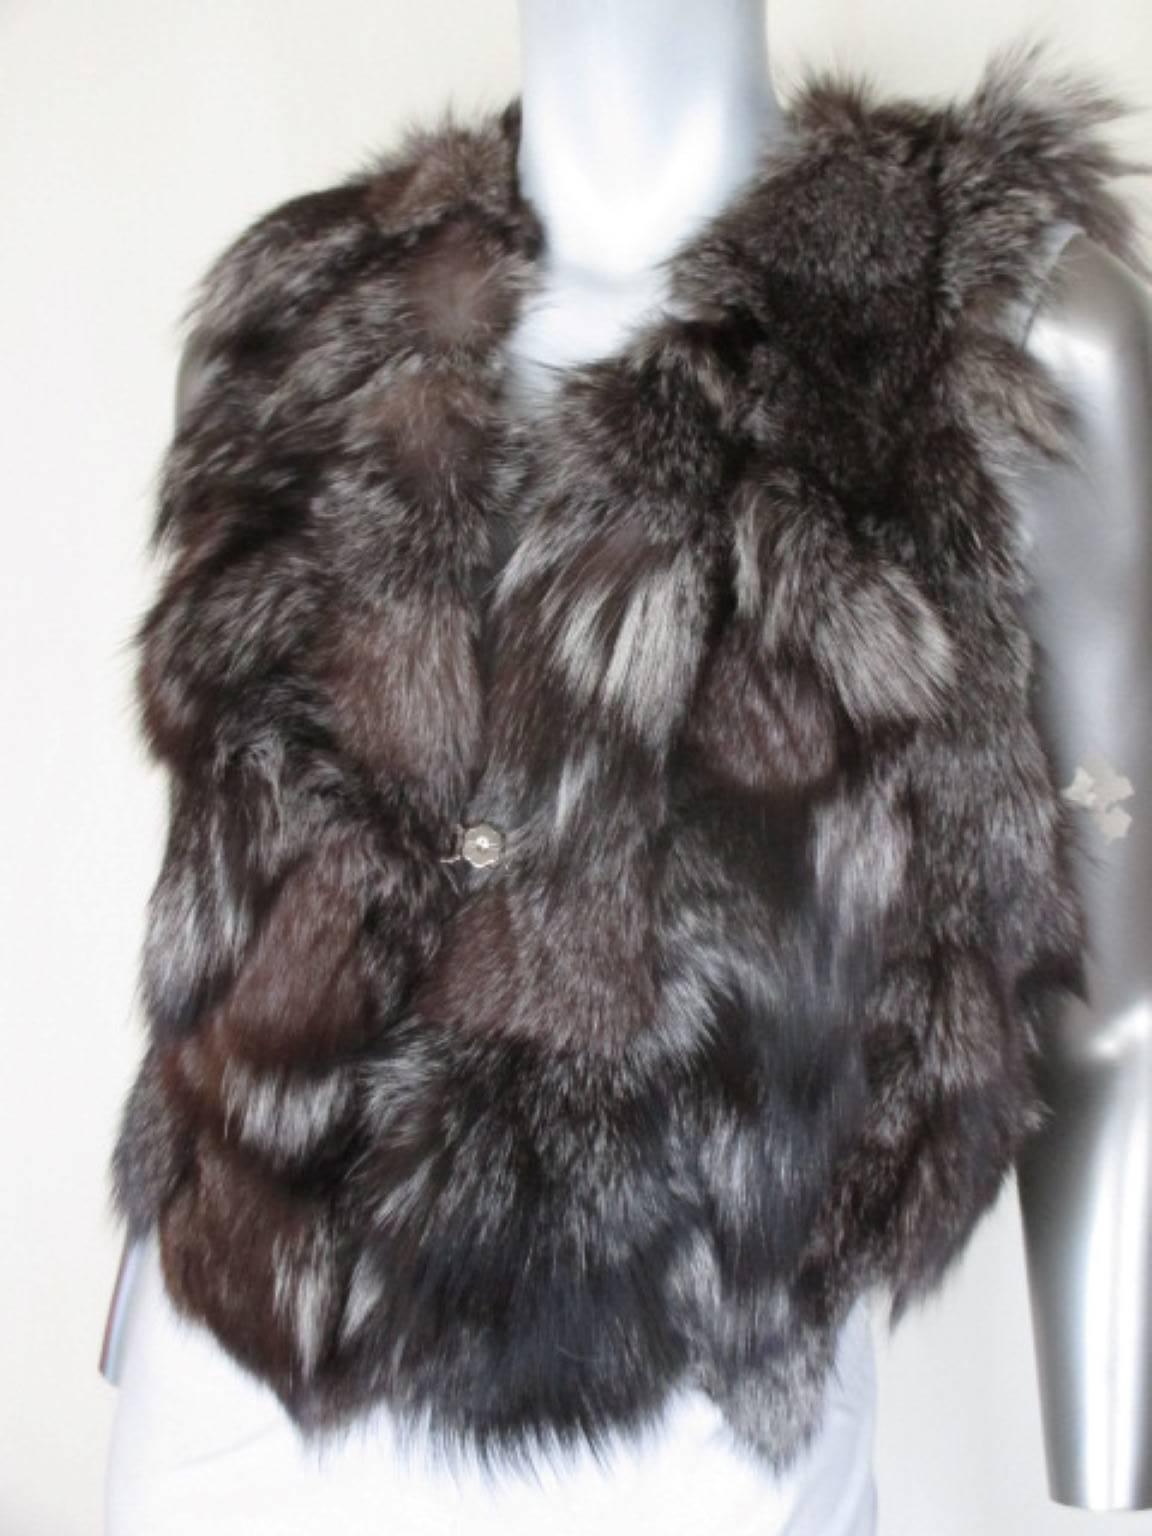 This vest is made of very good quality silver fox, no pockets and closes with a magnetic click button.
Size fits as small.
Please note that vintage items are not new and therefore might have minor imperfections. 
